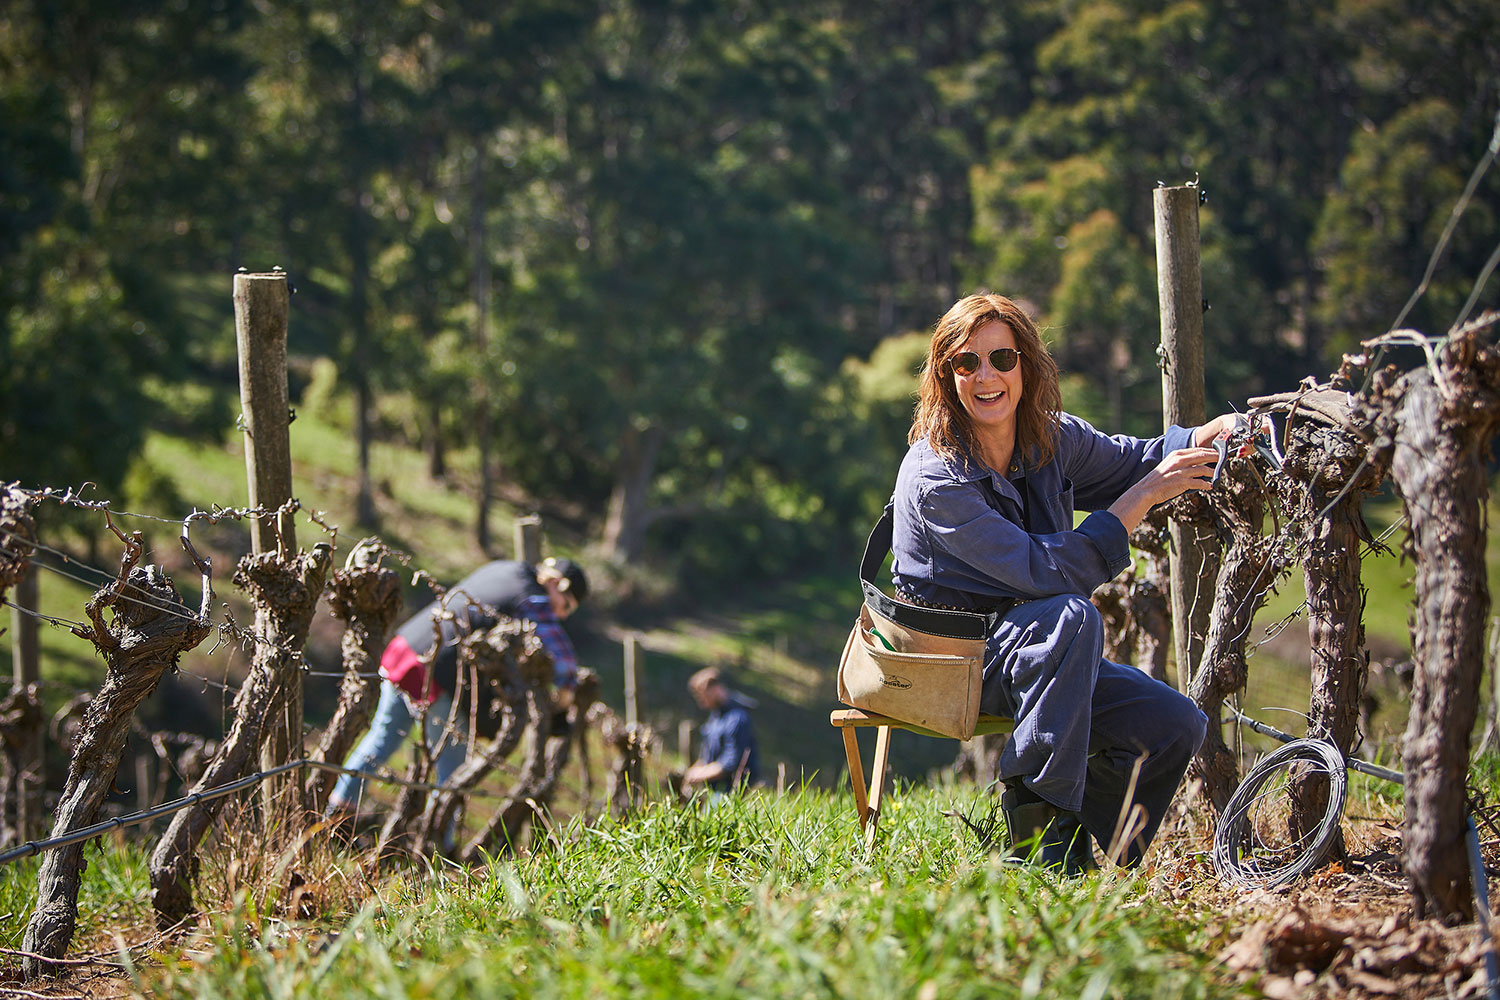 Rachel Griffiths in Aftertaste, Adelaide Hills, photo by Ian Routledge